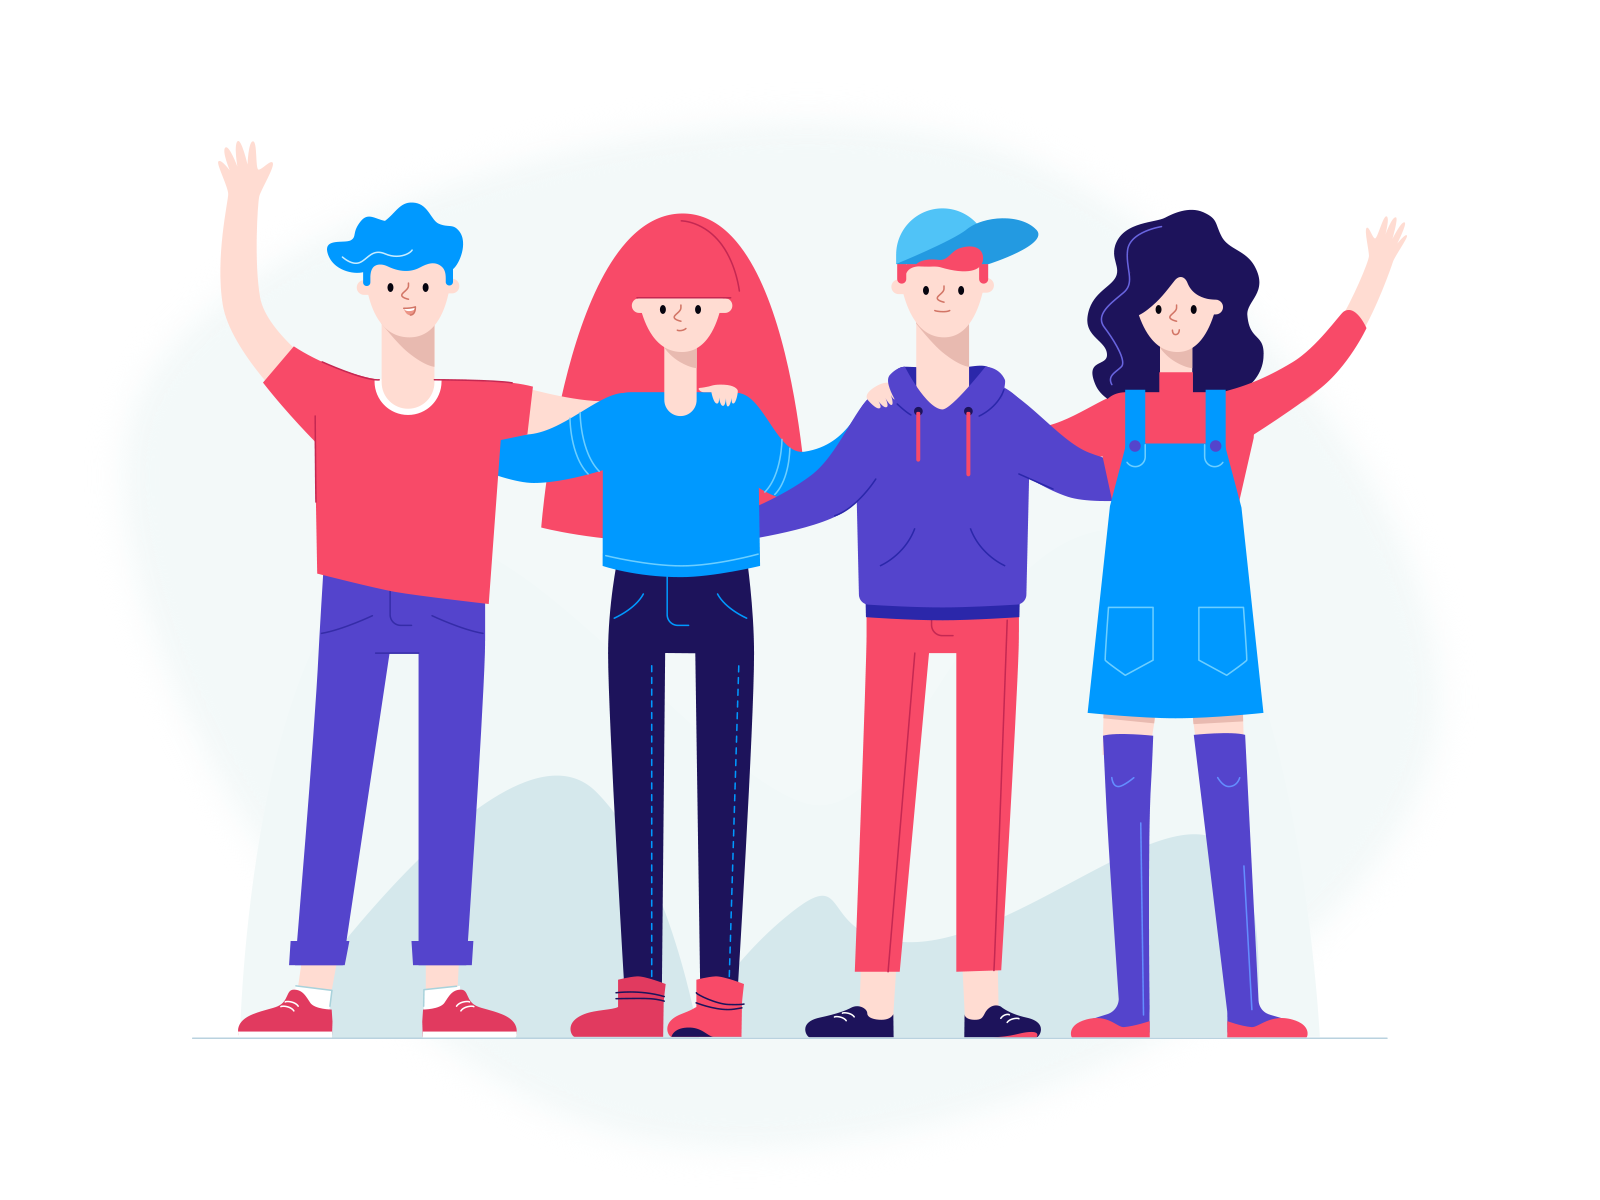 Team by Natali on Dribbble